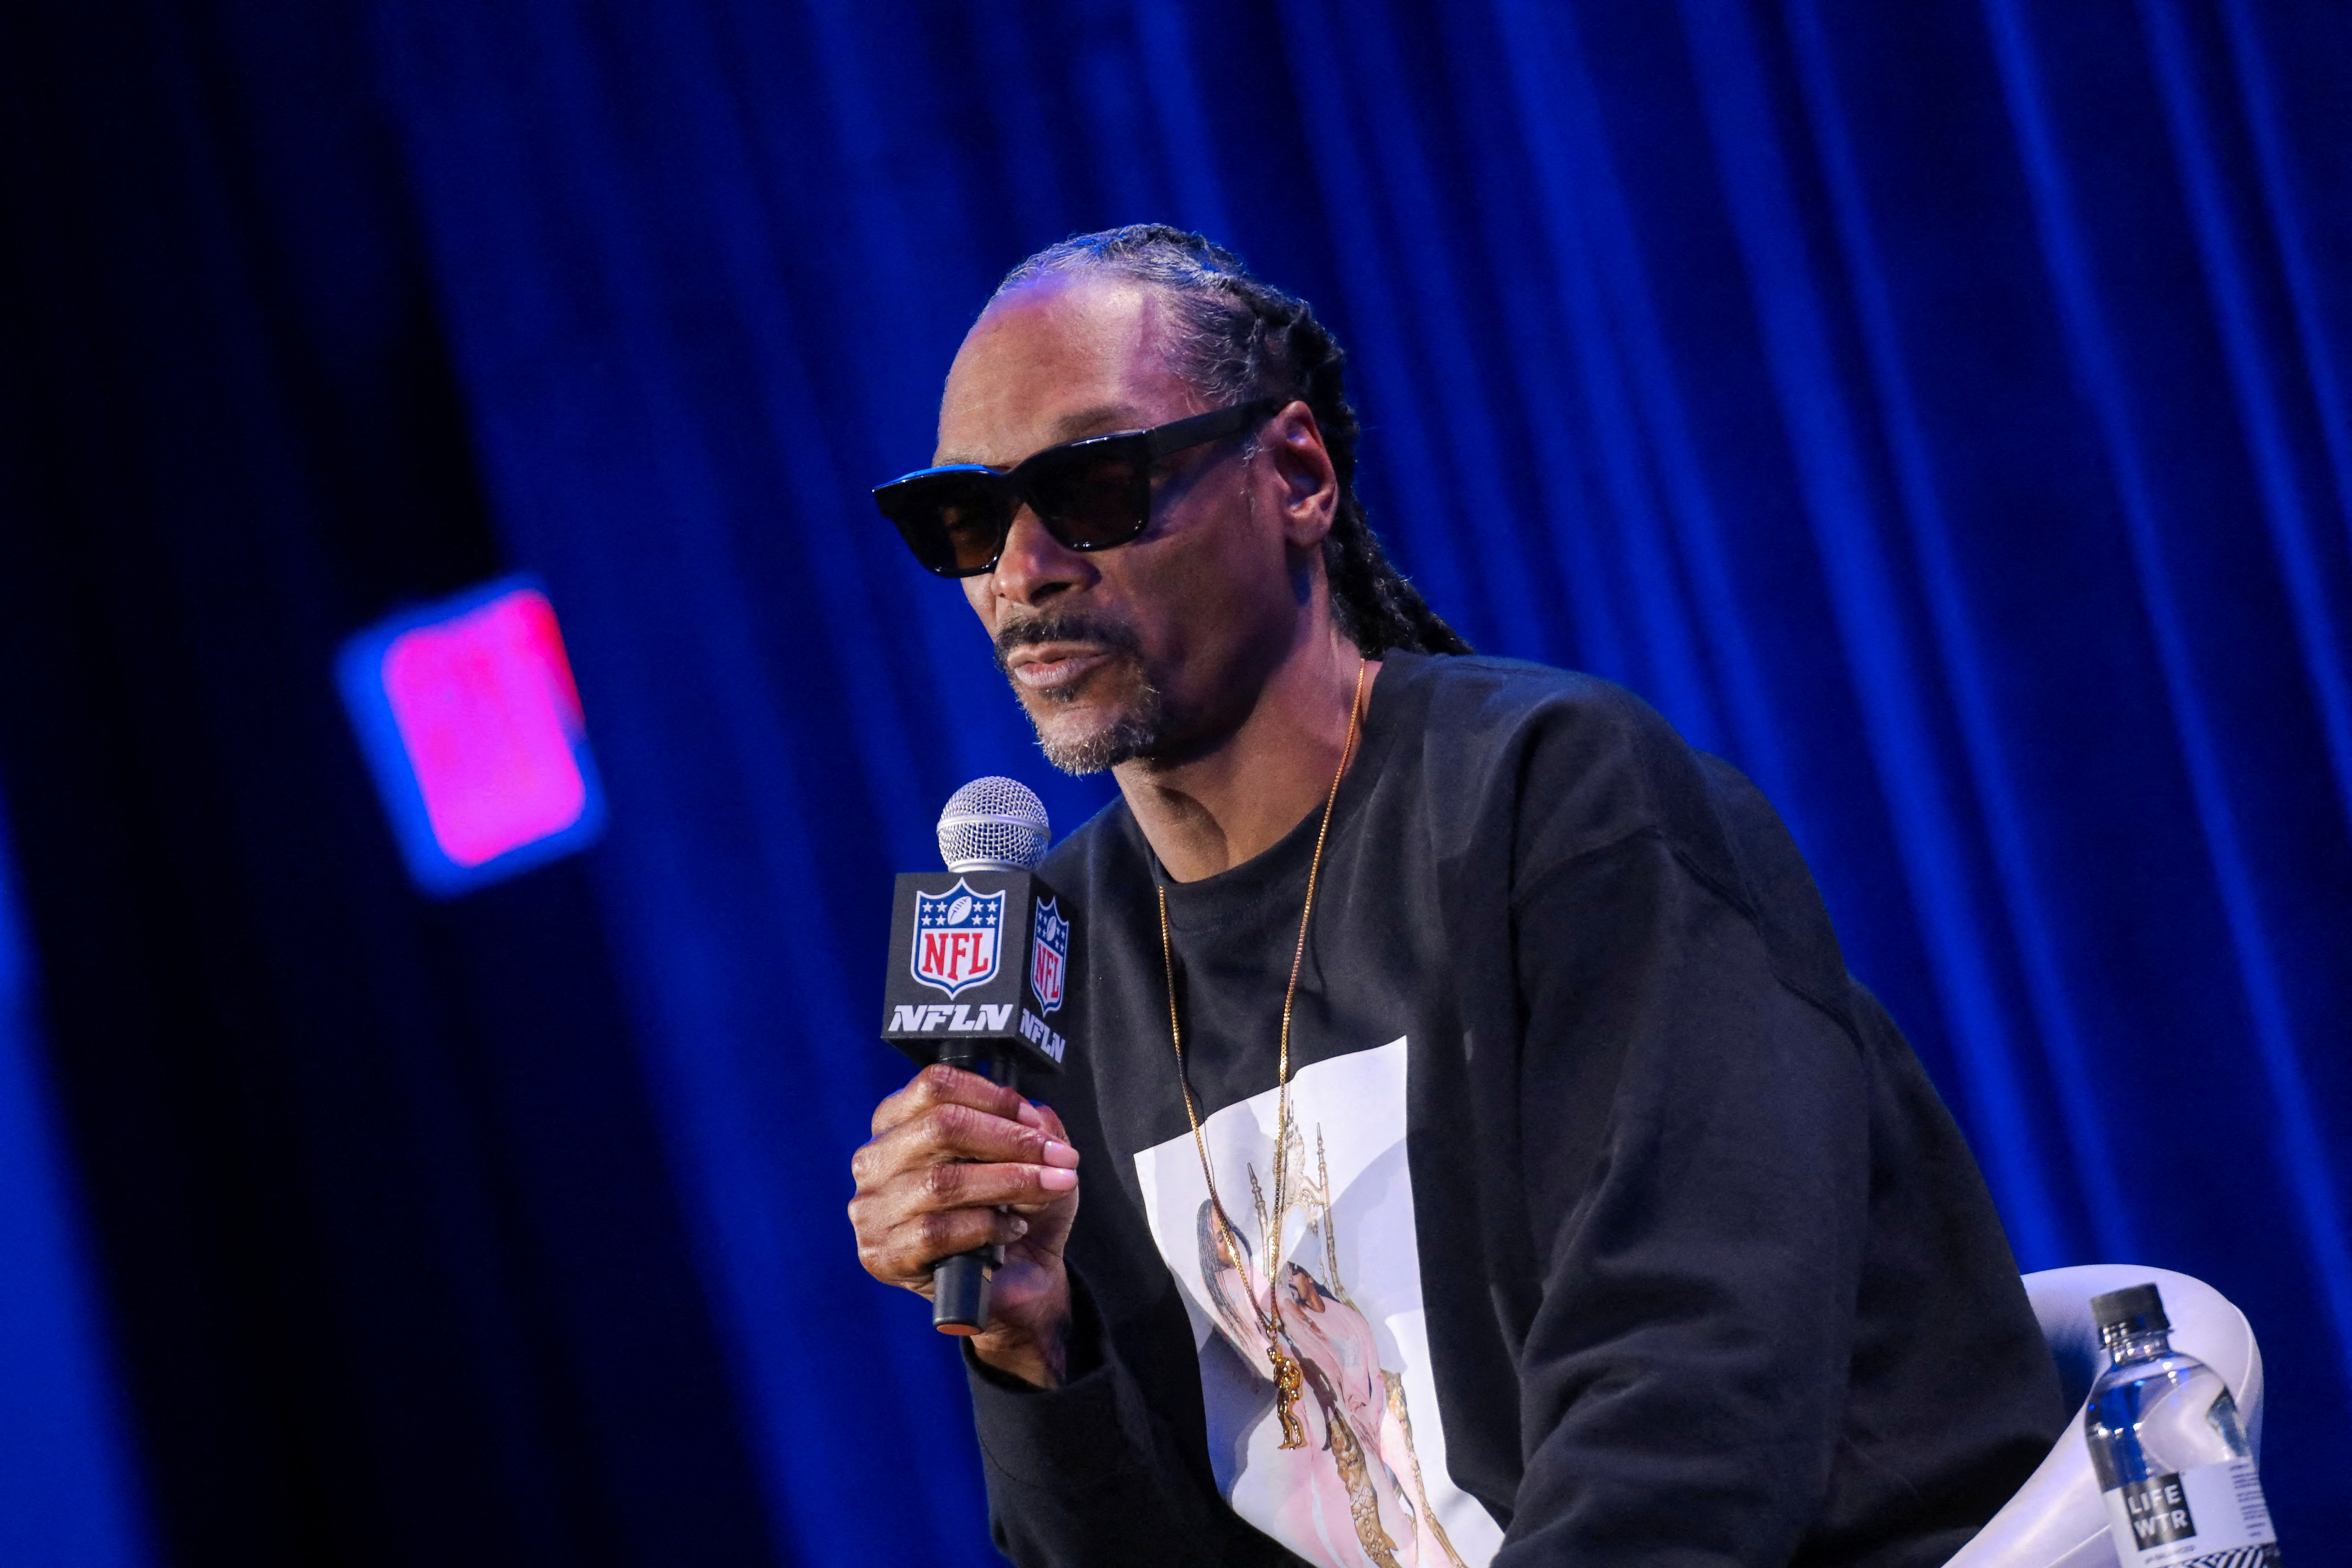 Rapper Snoop Dogg speaks during a news conference in Los Angeles